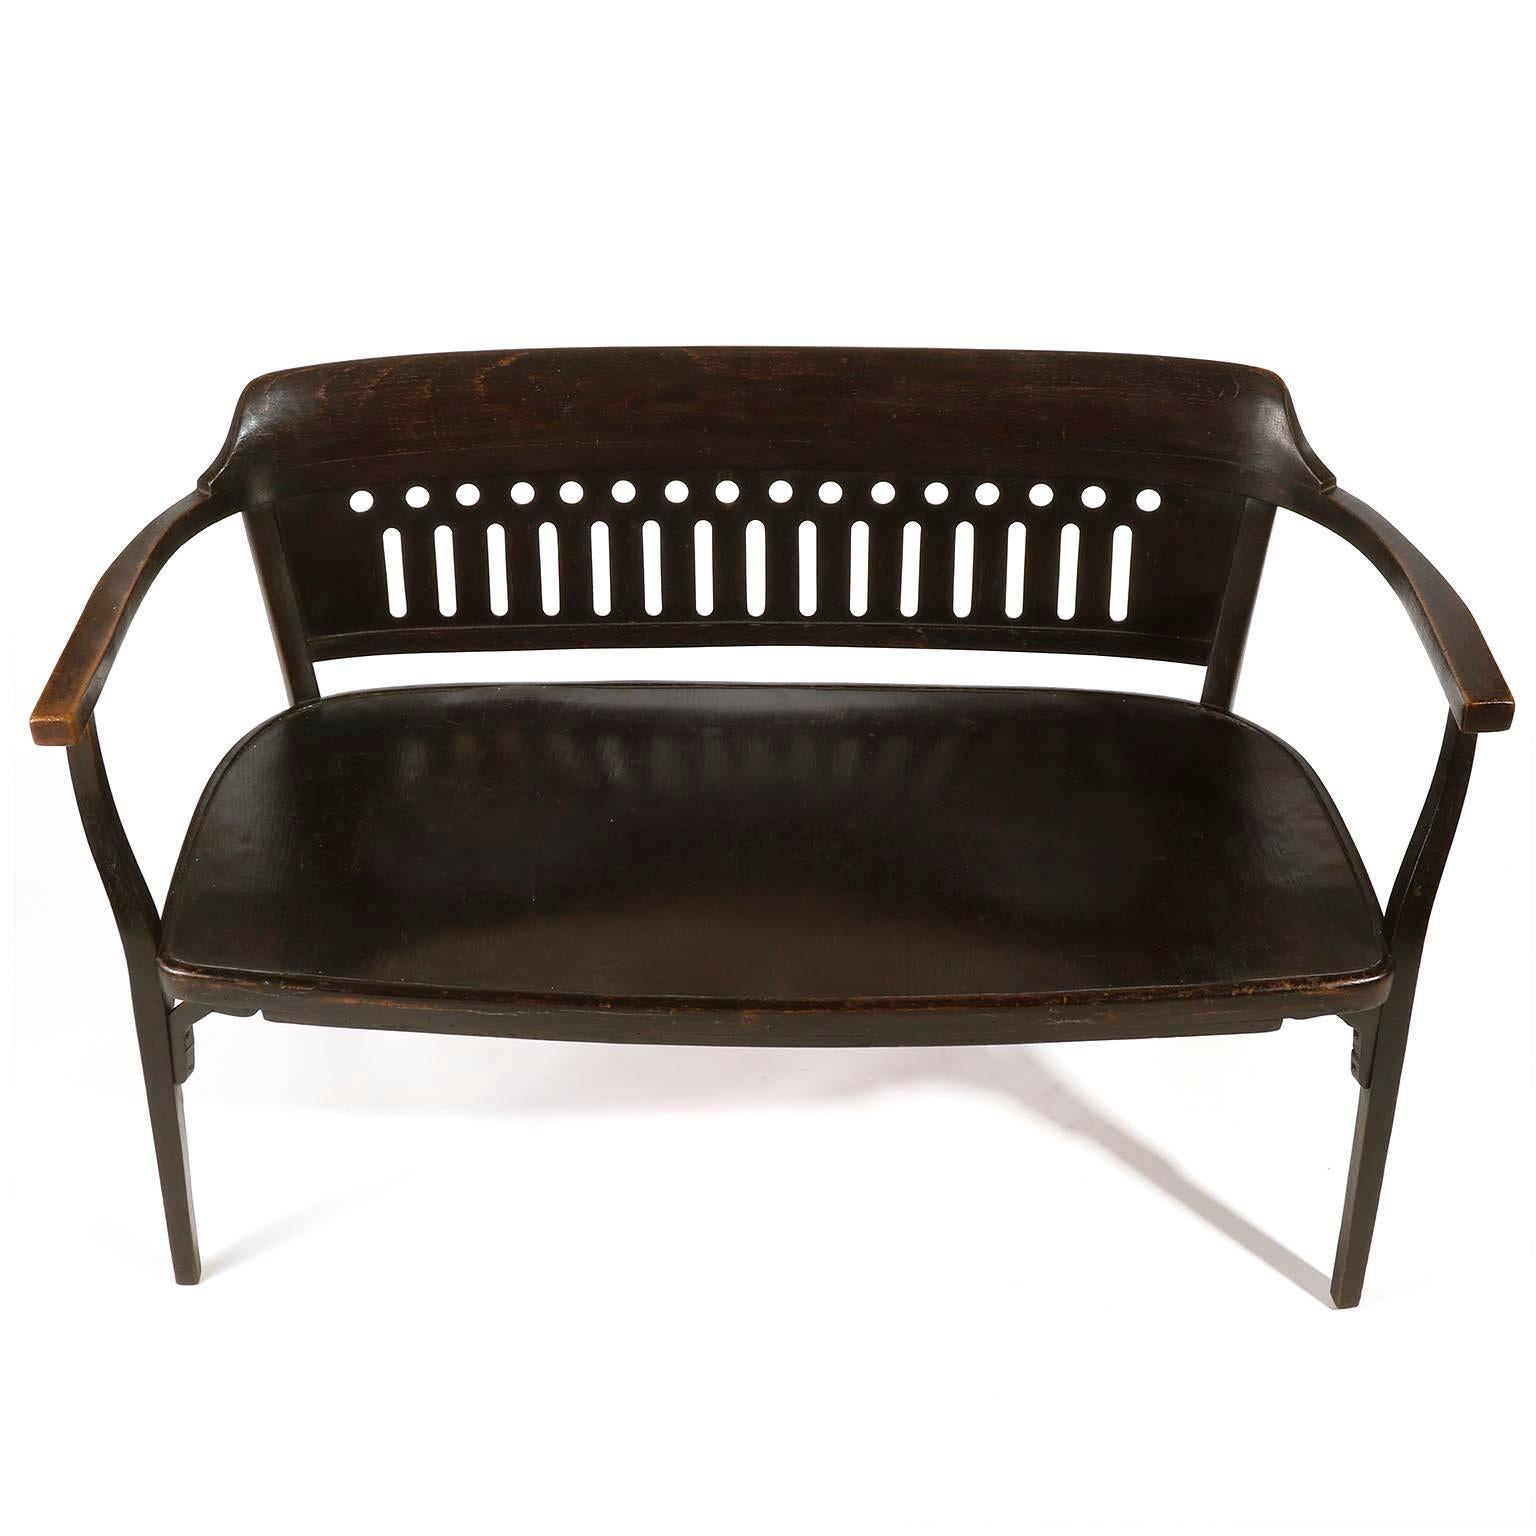 Polished Otto Wagner Settee Bench Bentwood, Thonet, Austria, Vienna Secession, circa 1905